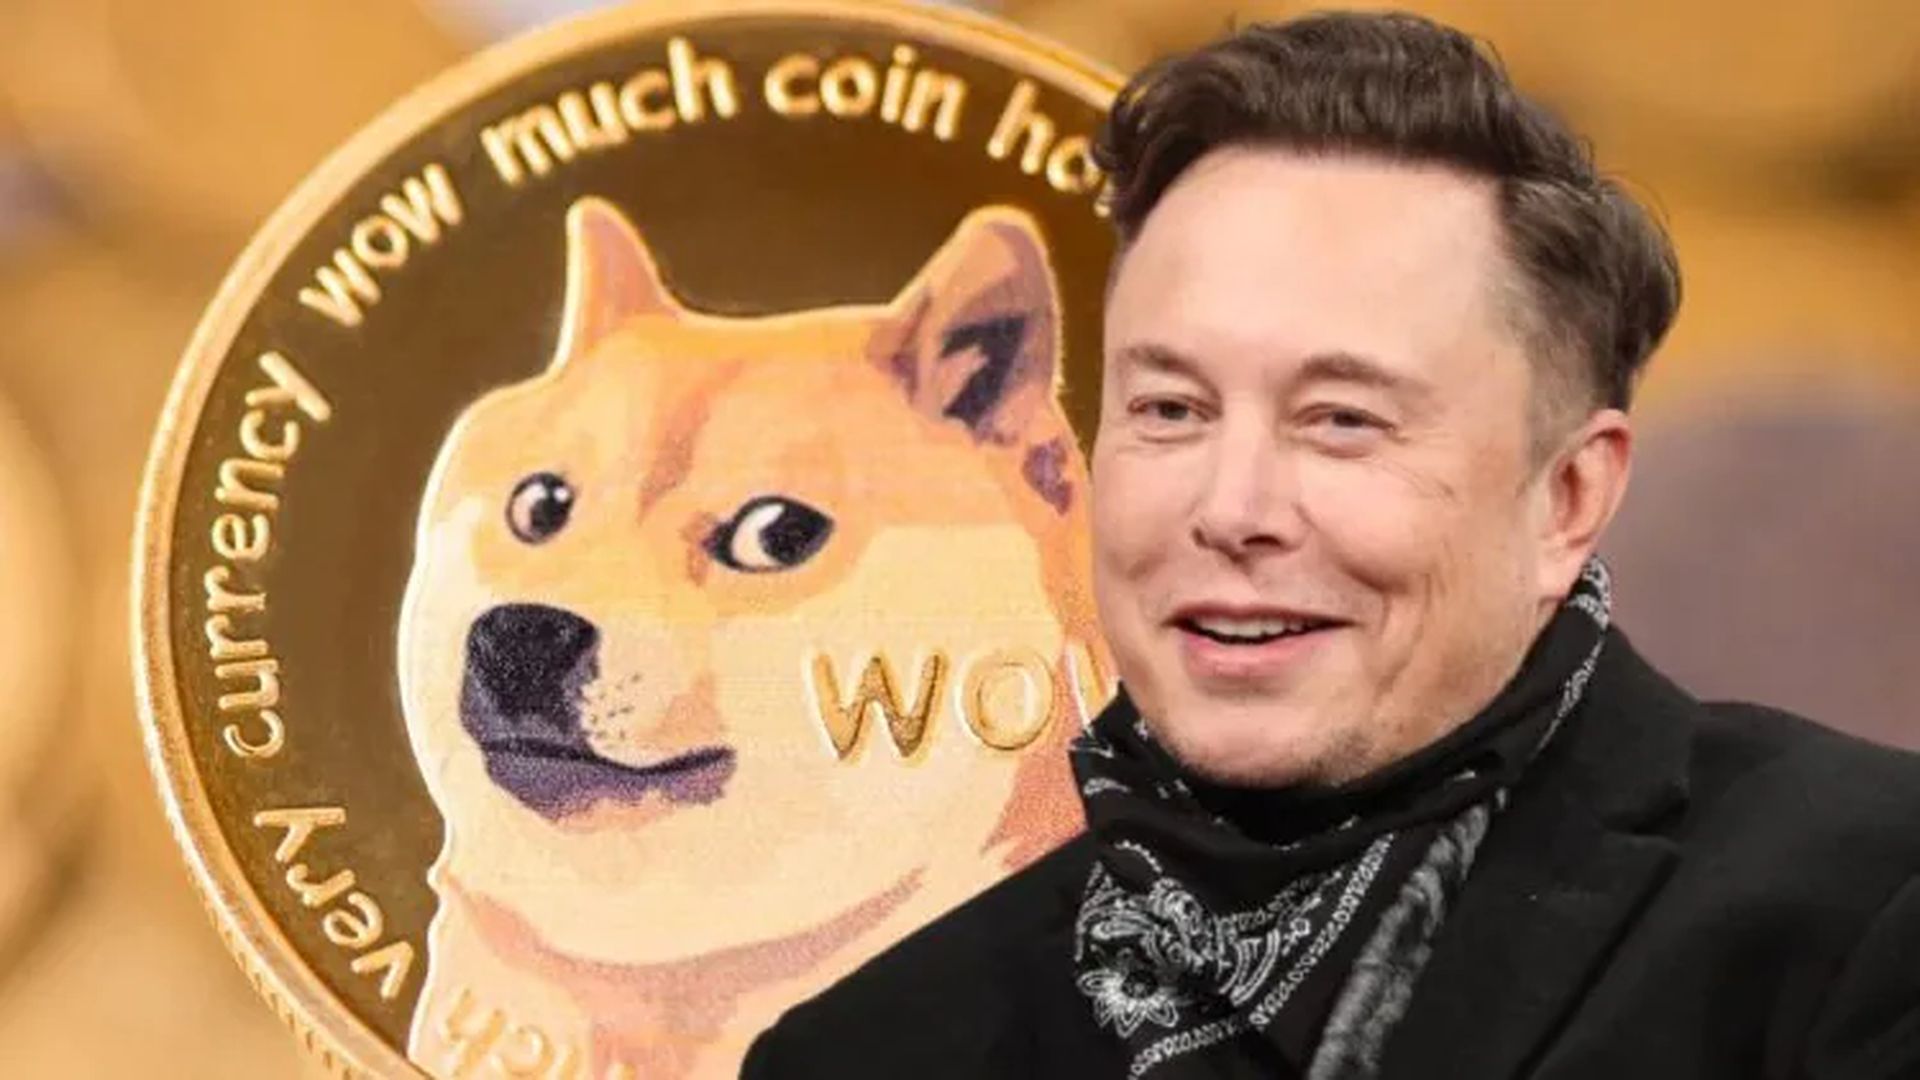 In this article, we are going to go over Elon Musk sued over claims of Dogecoin pyramid scheme, and answer the question is Dogecoin a pyramid scheme.